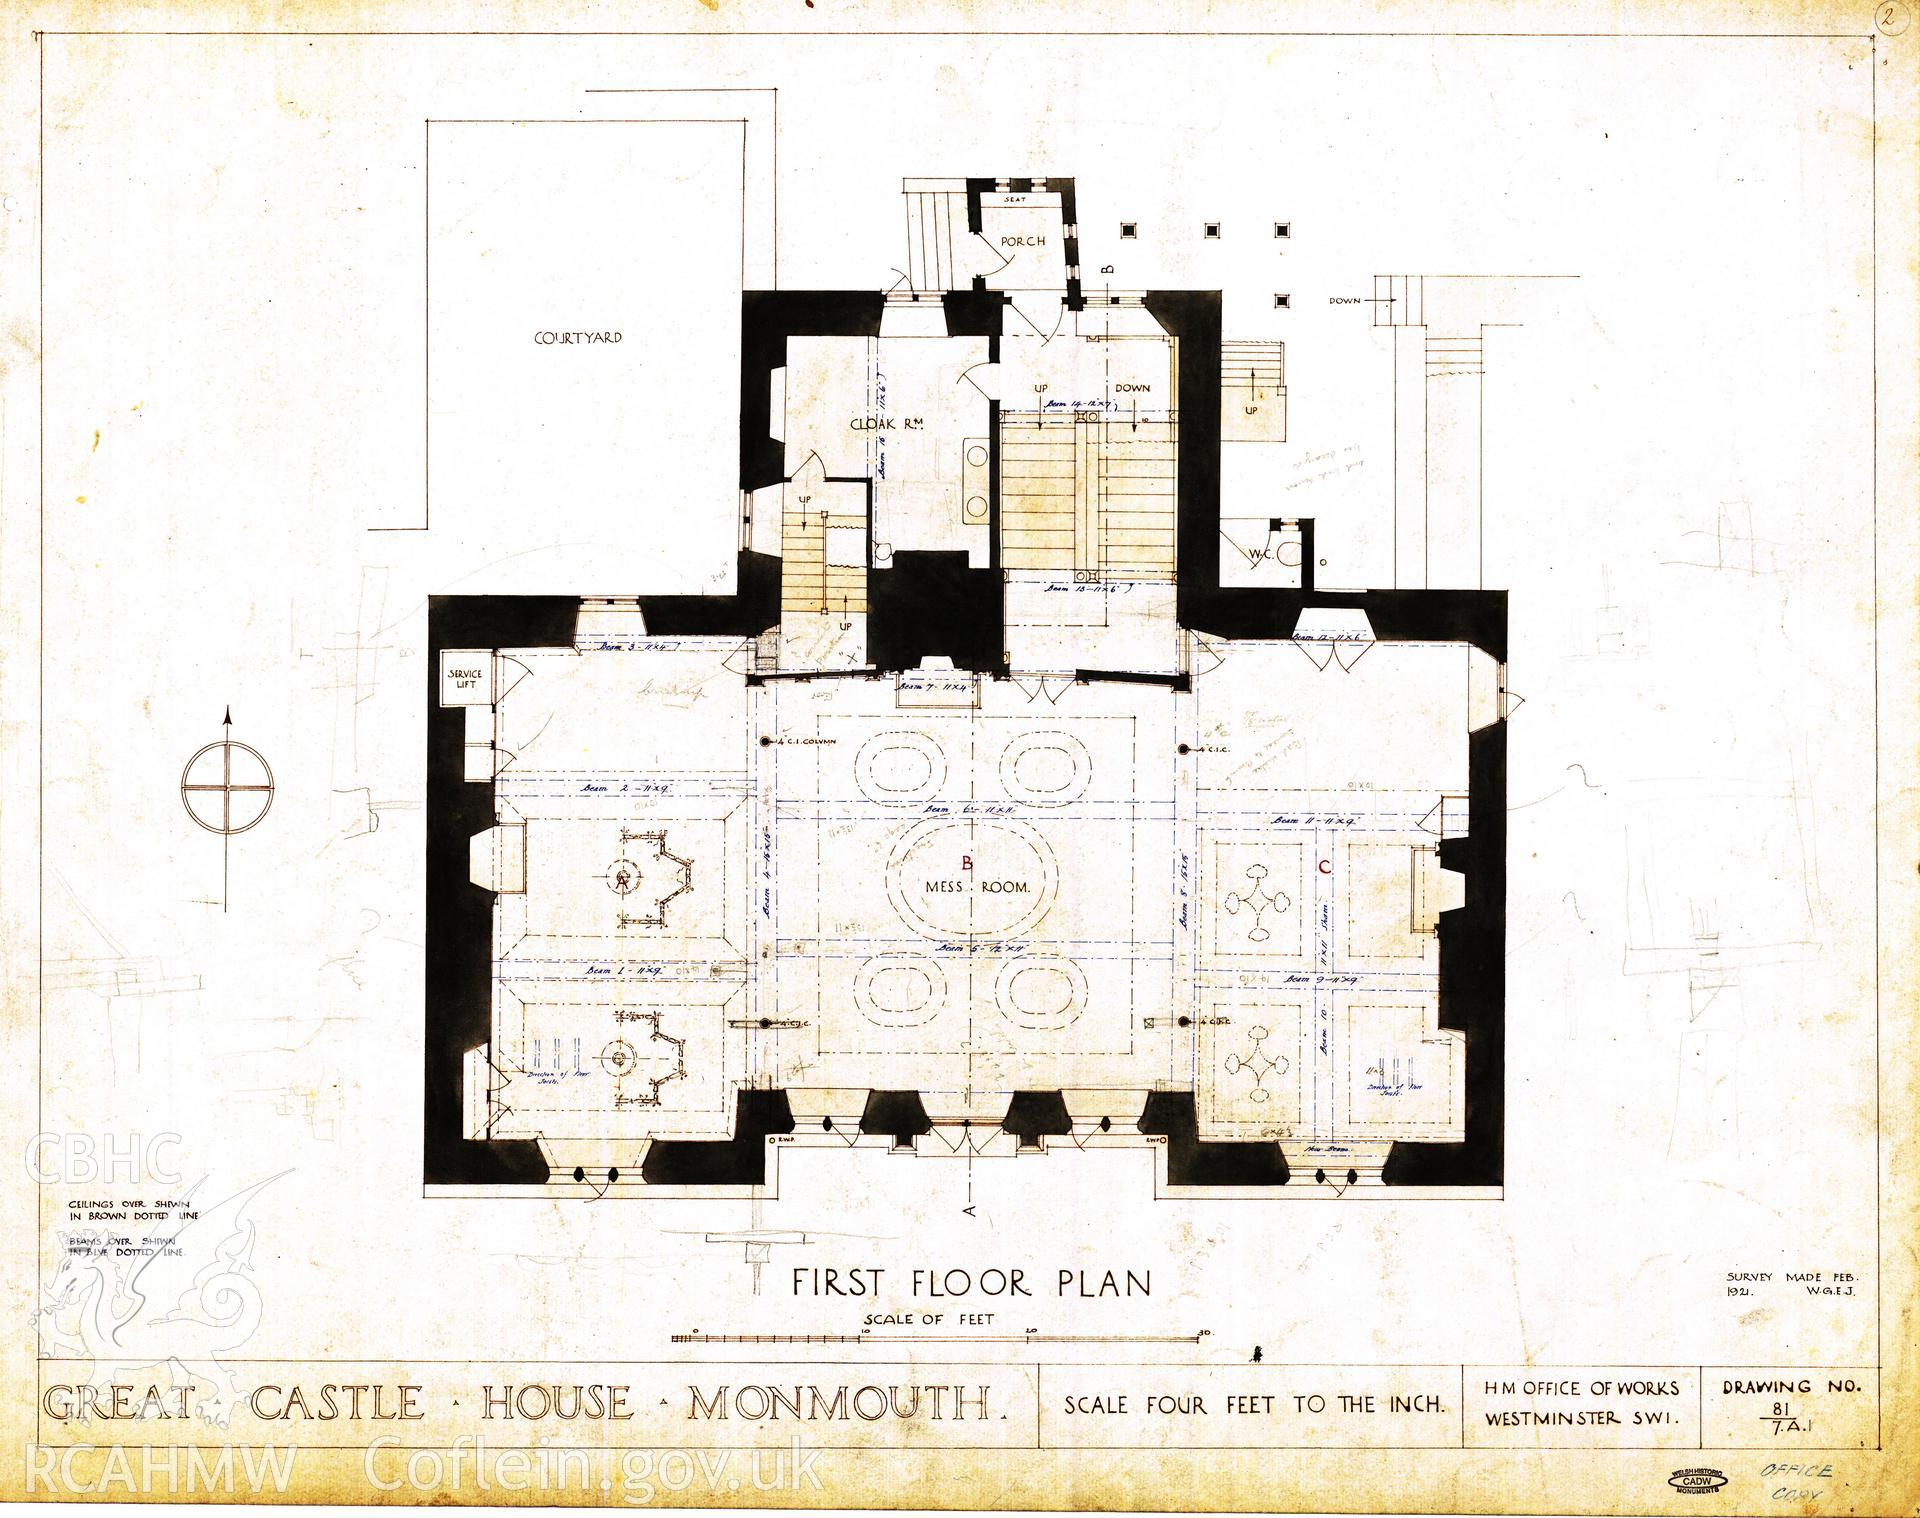 Cadw guardianship monument drawing of Monmouth Great Castle House. Survey Plan - 1st Foor. Cadw Ref. No:81/7A1. Scale 1:48.